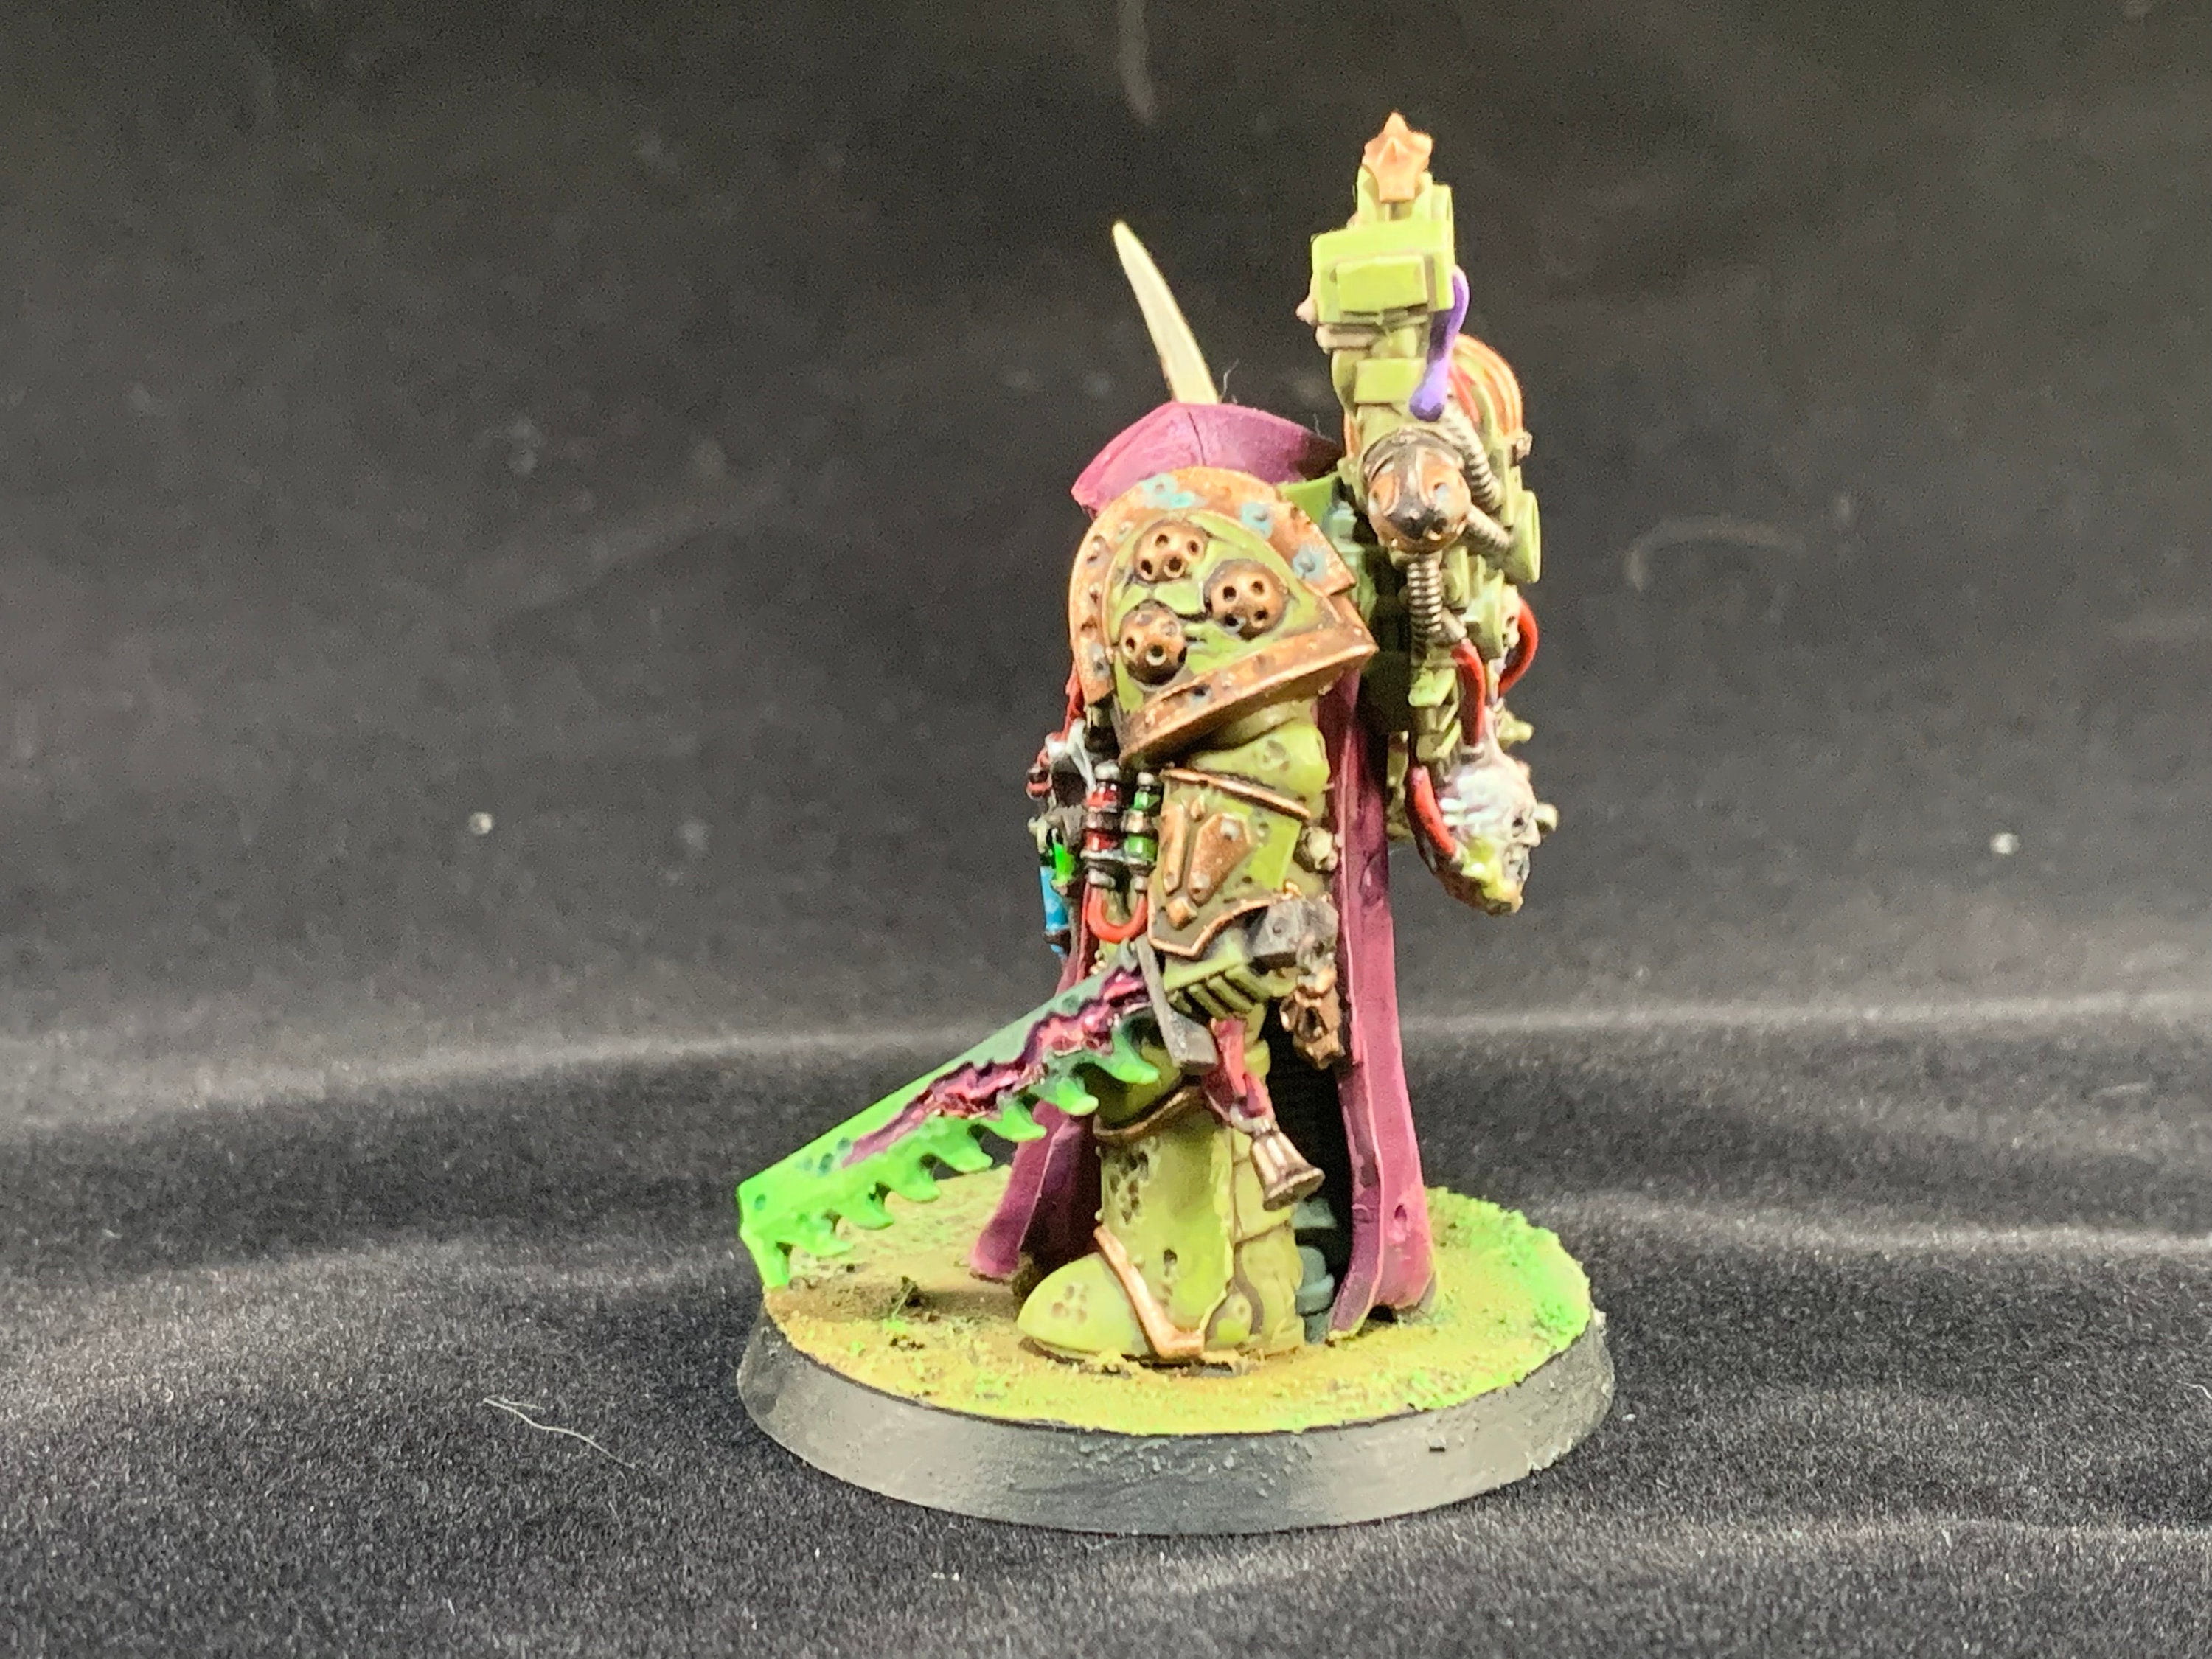 Warhammer 40k Death Guard Plague Surgeon for Sale, Custom Orders of 40k,  30k & Age of Sigmar Available -  Israel